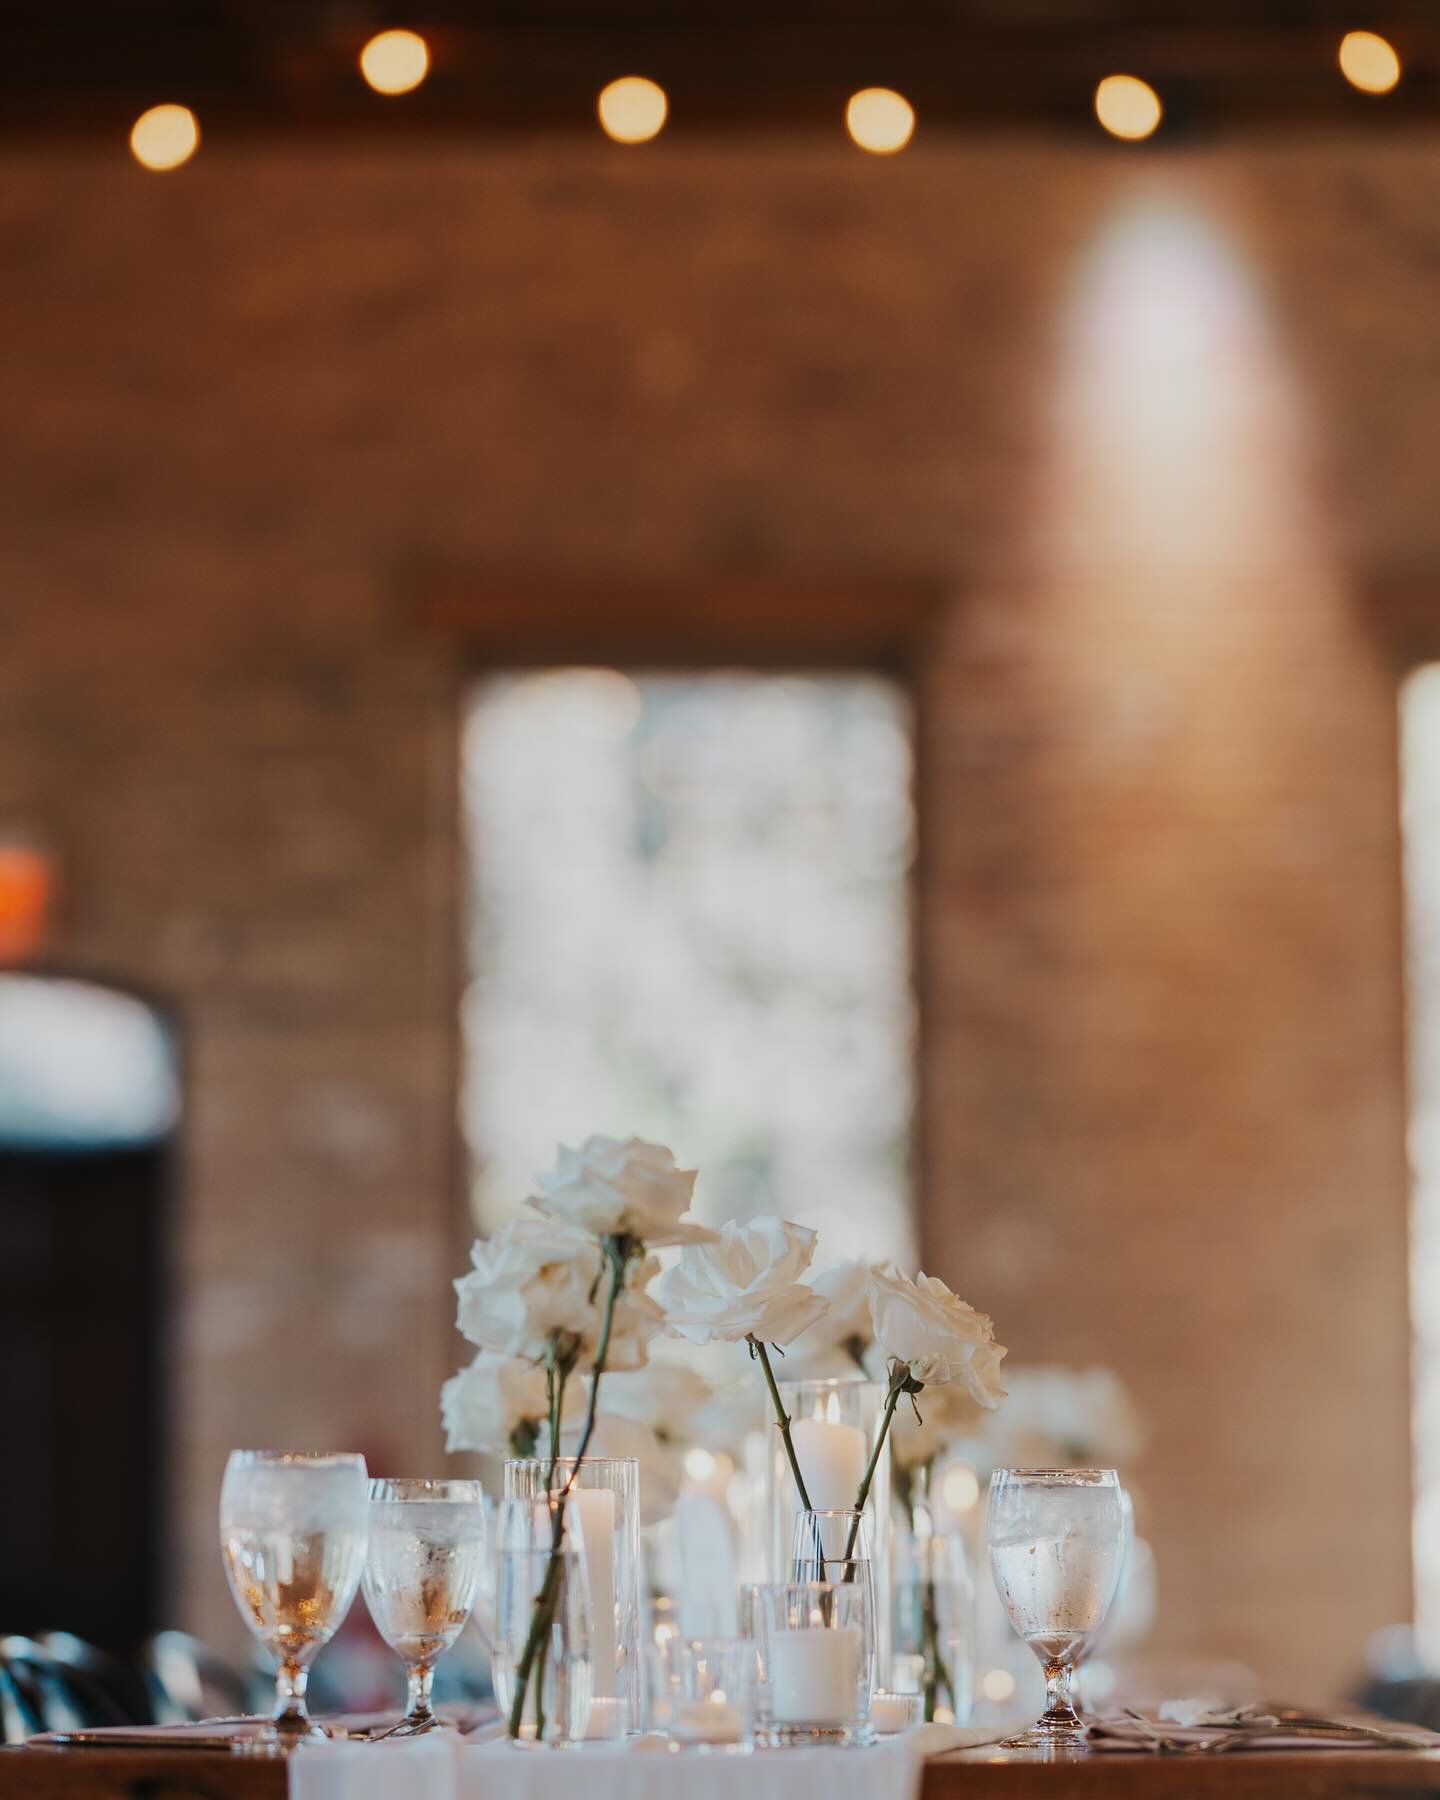 a goal of mine this year is to get even better at reception/table details &mdash; but here are some i did love from a+ m&rsquo;s gorgeous day that i love 
.
.
.
second shot @brookeemilyphoto 
#daniellerosephotography #daniellerosephoto #DRP #chicago 